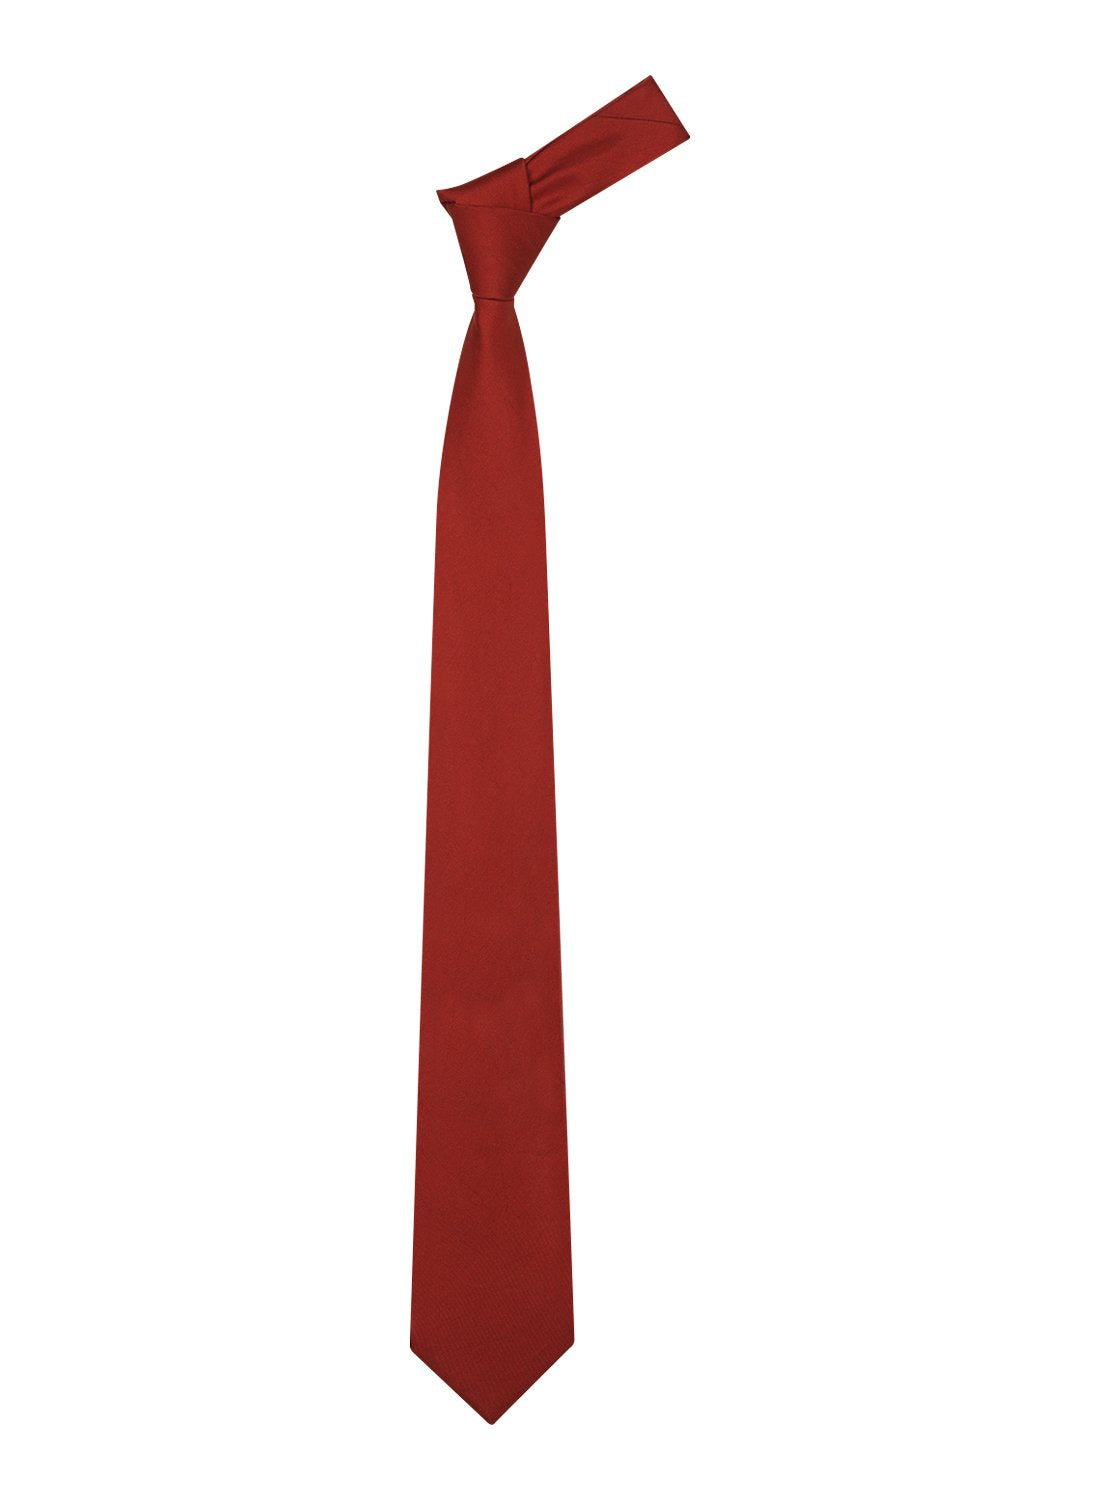 Chokore Red Silk Tie from Solids line